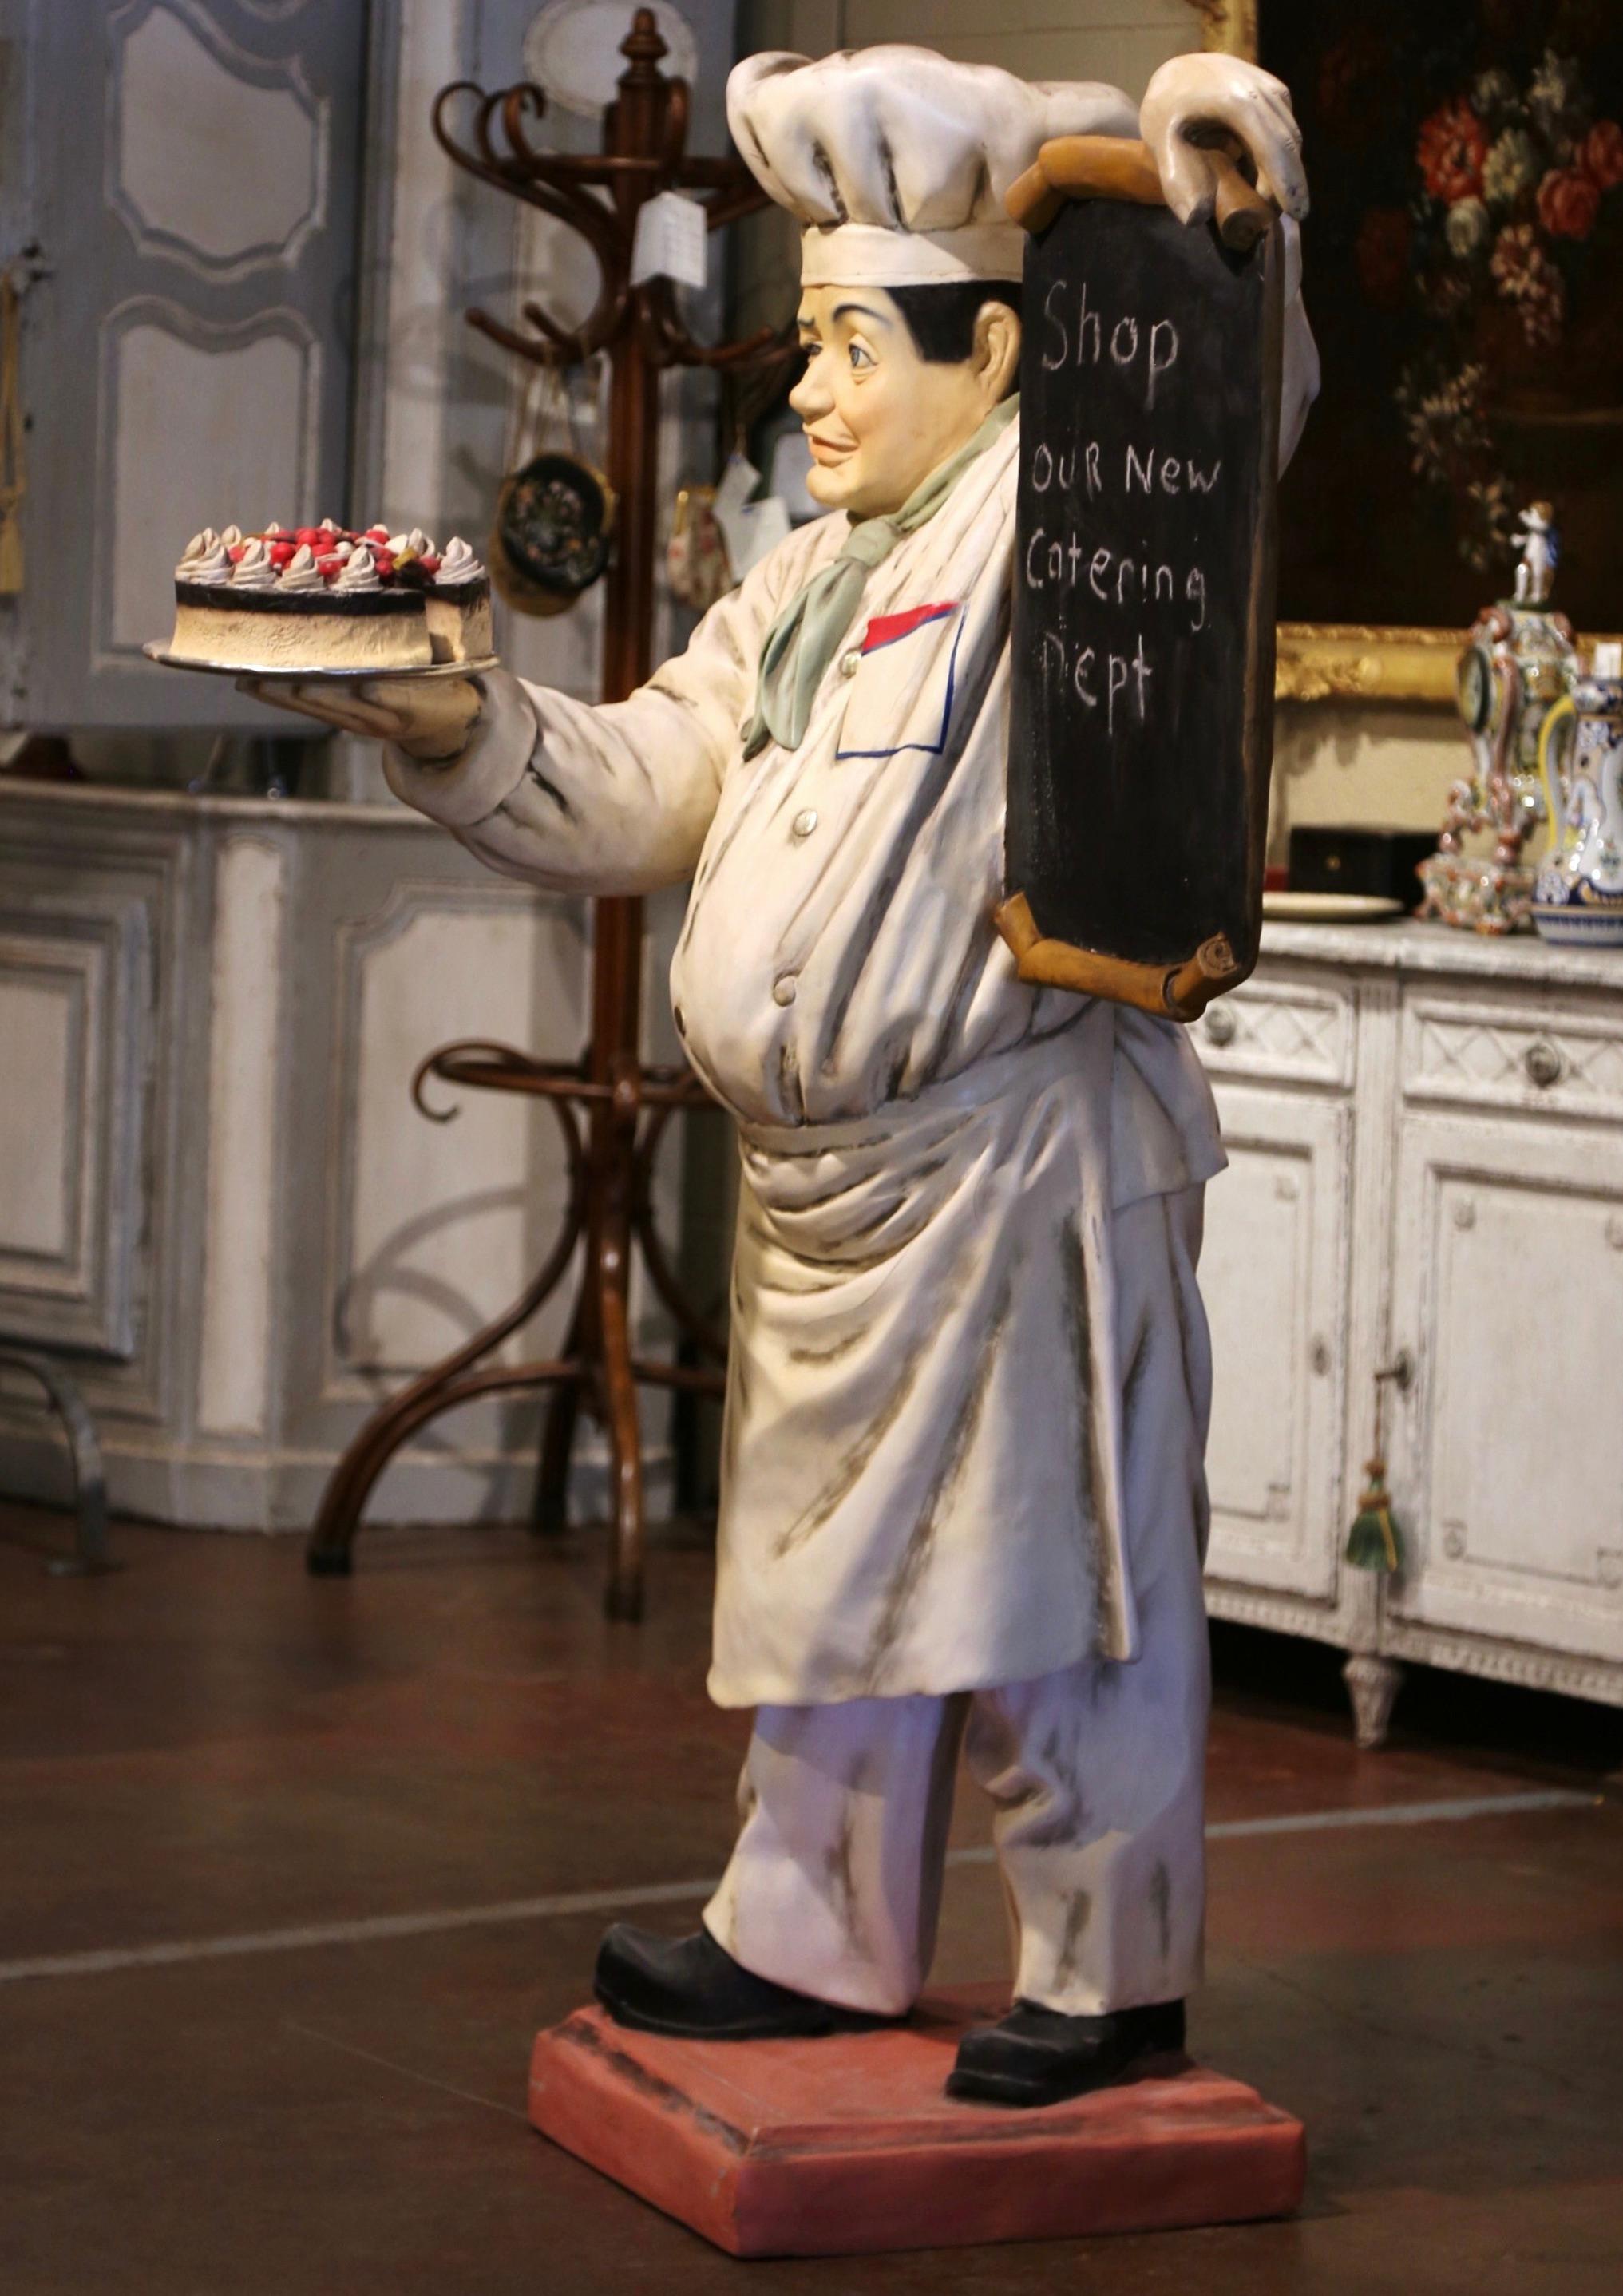 Decorate a restaurant or a bakery with this antique display chef sculpture. Crafted circa 1960, the vintage statue composition features a life size cheerful baker chef holding a cake in one hand, while holding a chalk menu board in the other. The